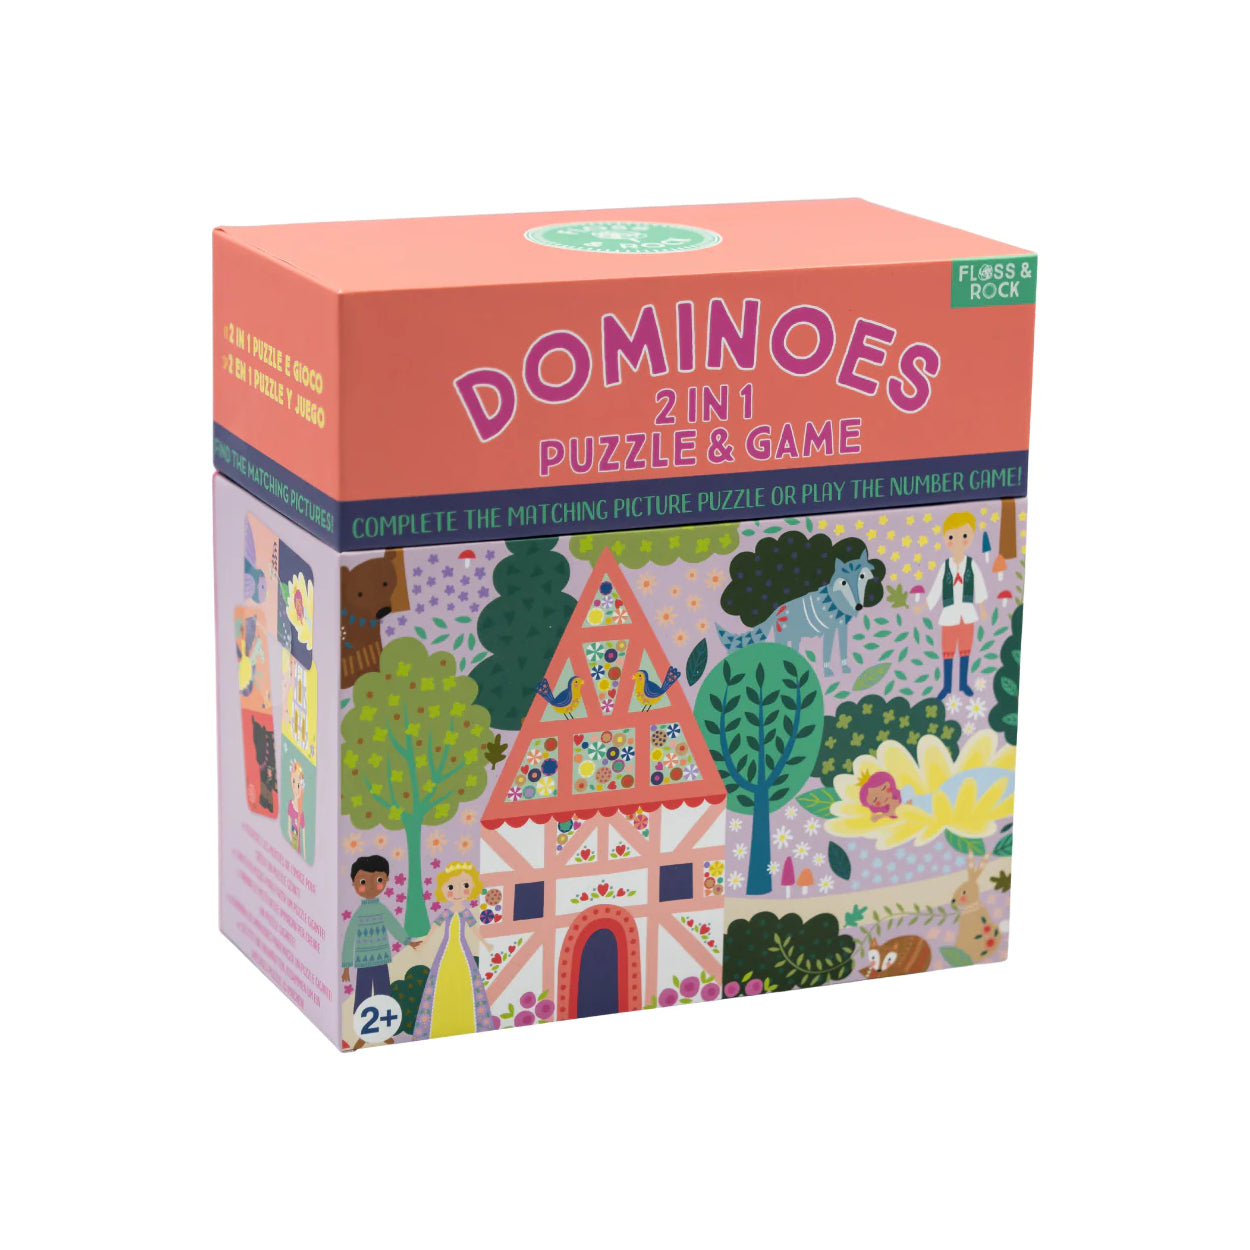 Fairytale Dominoes box front